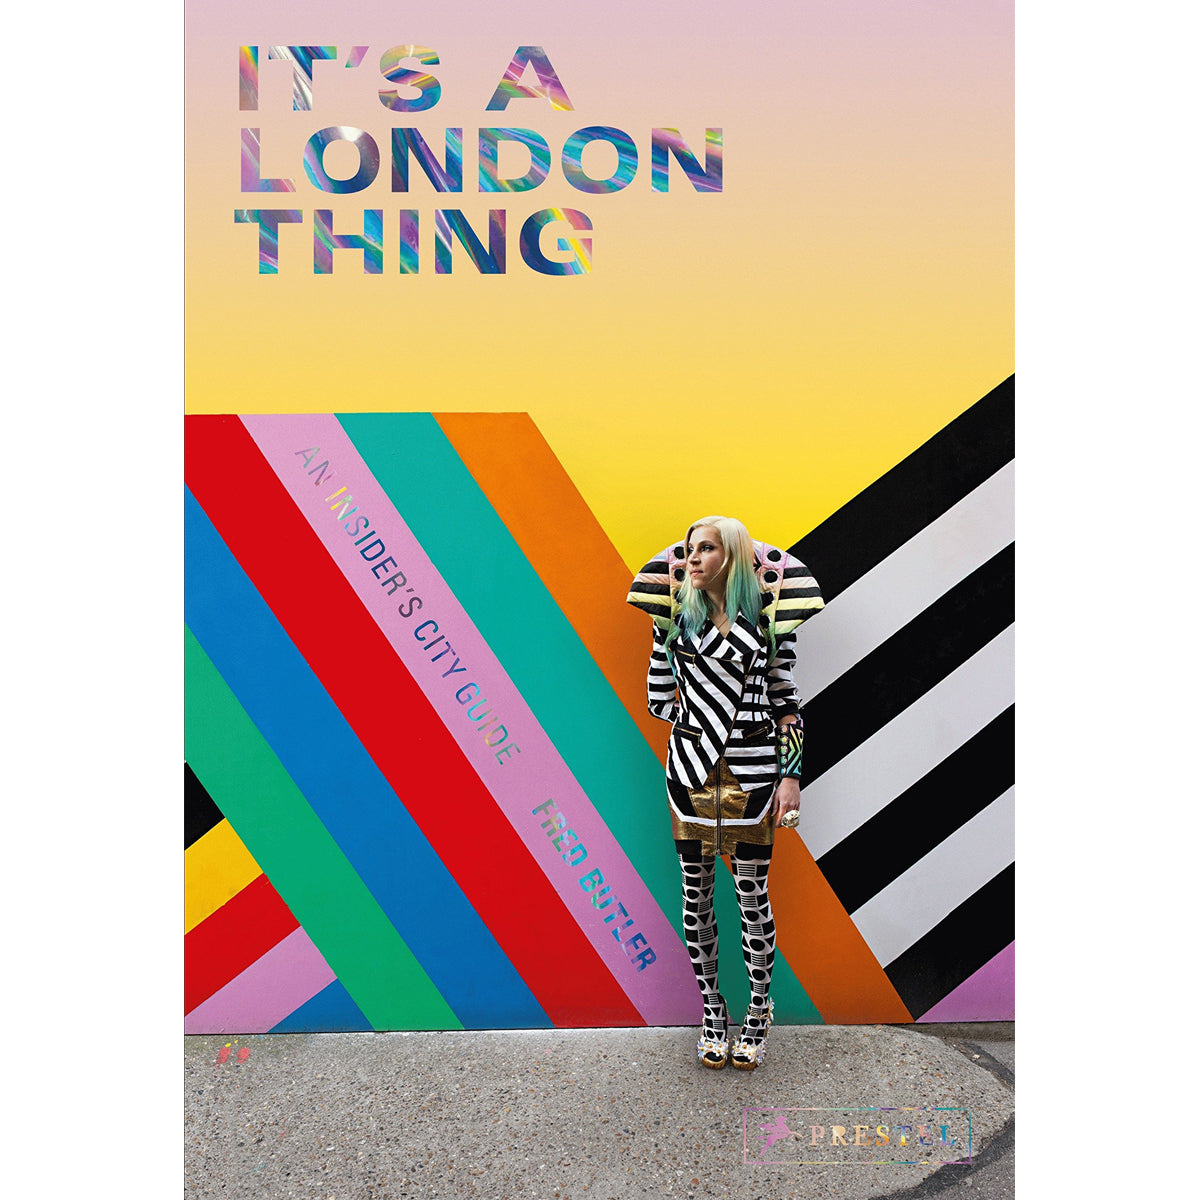 It's A London Thing Book cover